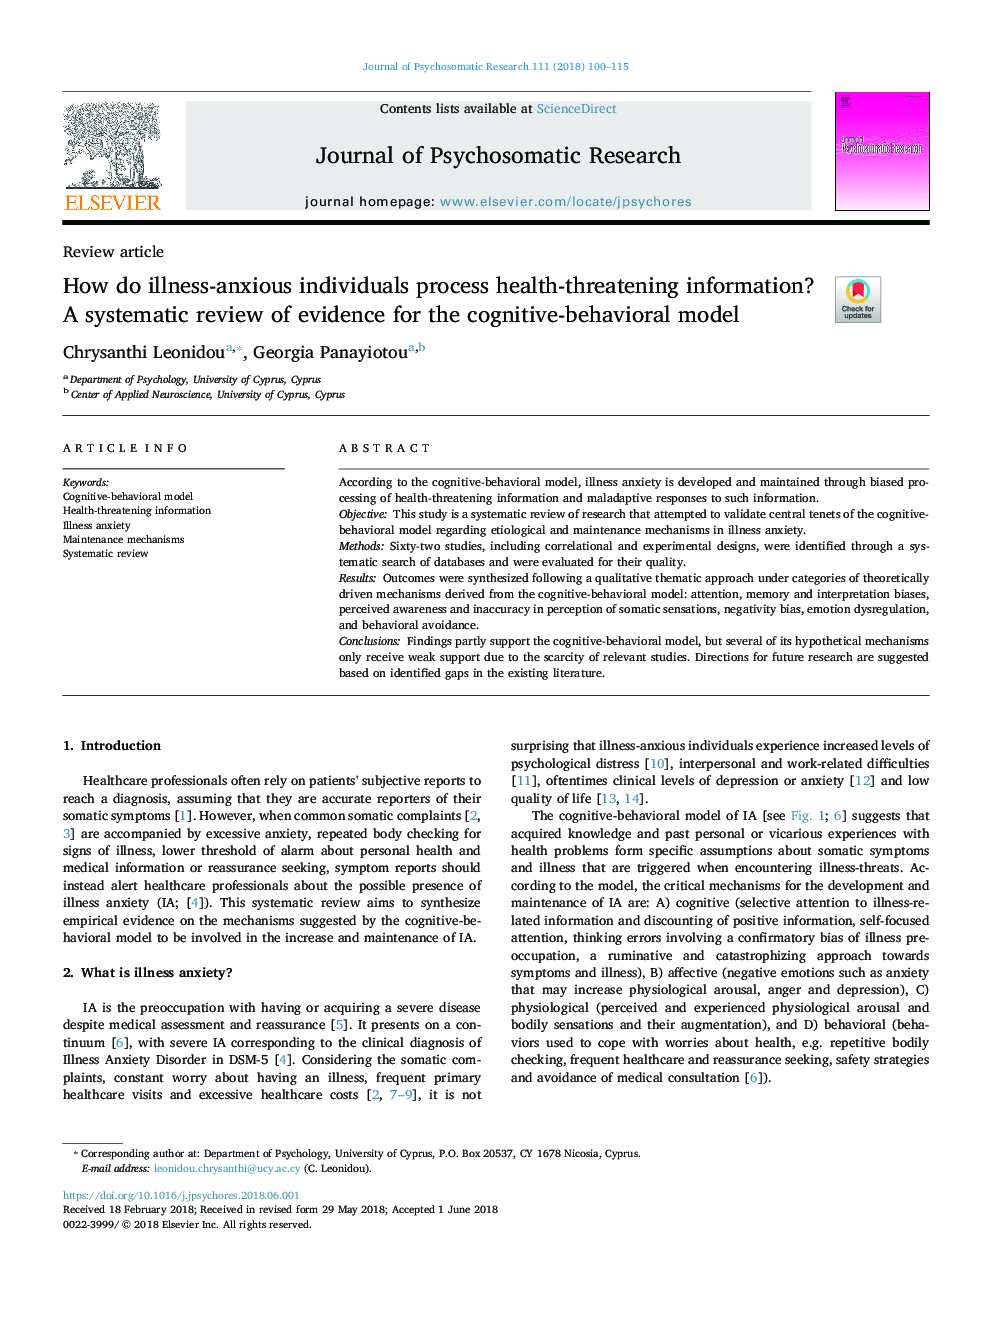 How do illness-anxious individuals process health-threatening information? A systematic review of evidence for the cognitive-behavioral model